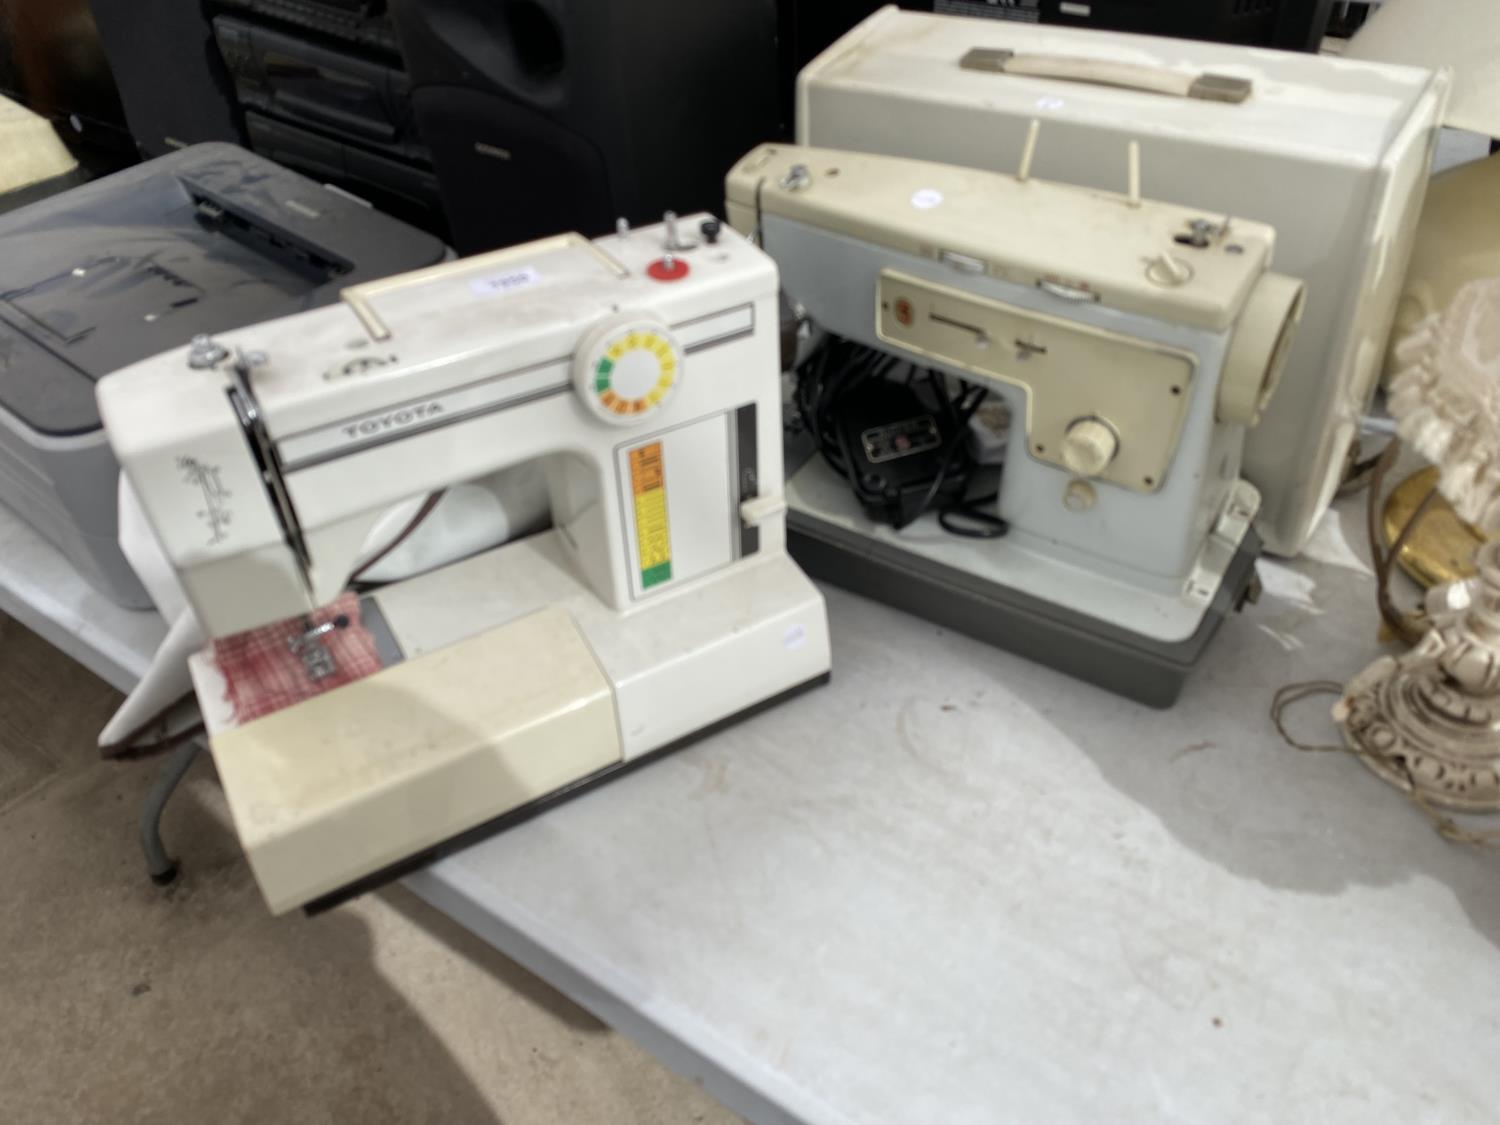 A RETRO TOYOTA SEWING MACHINE AND FURTHER RETRO SINGER SEWING MACHINE WITH FOOT PEDAL